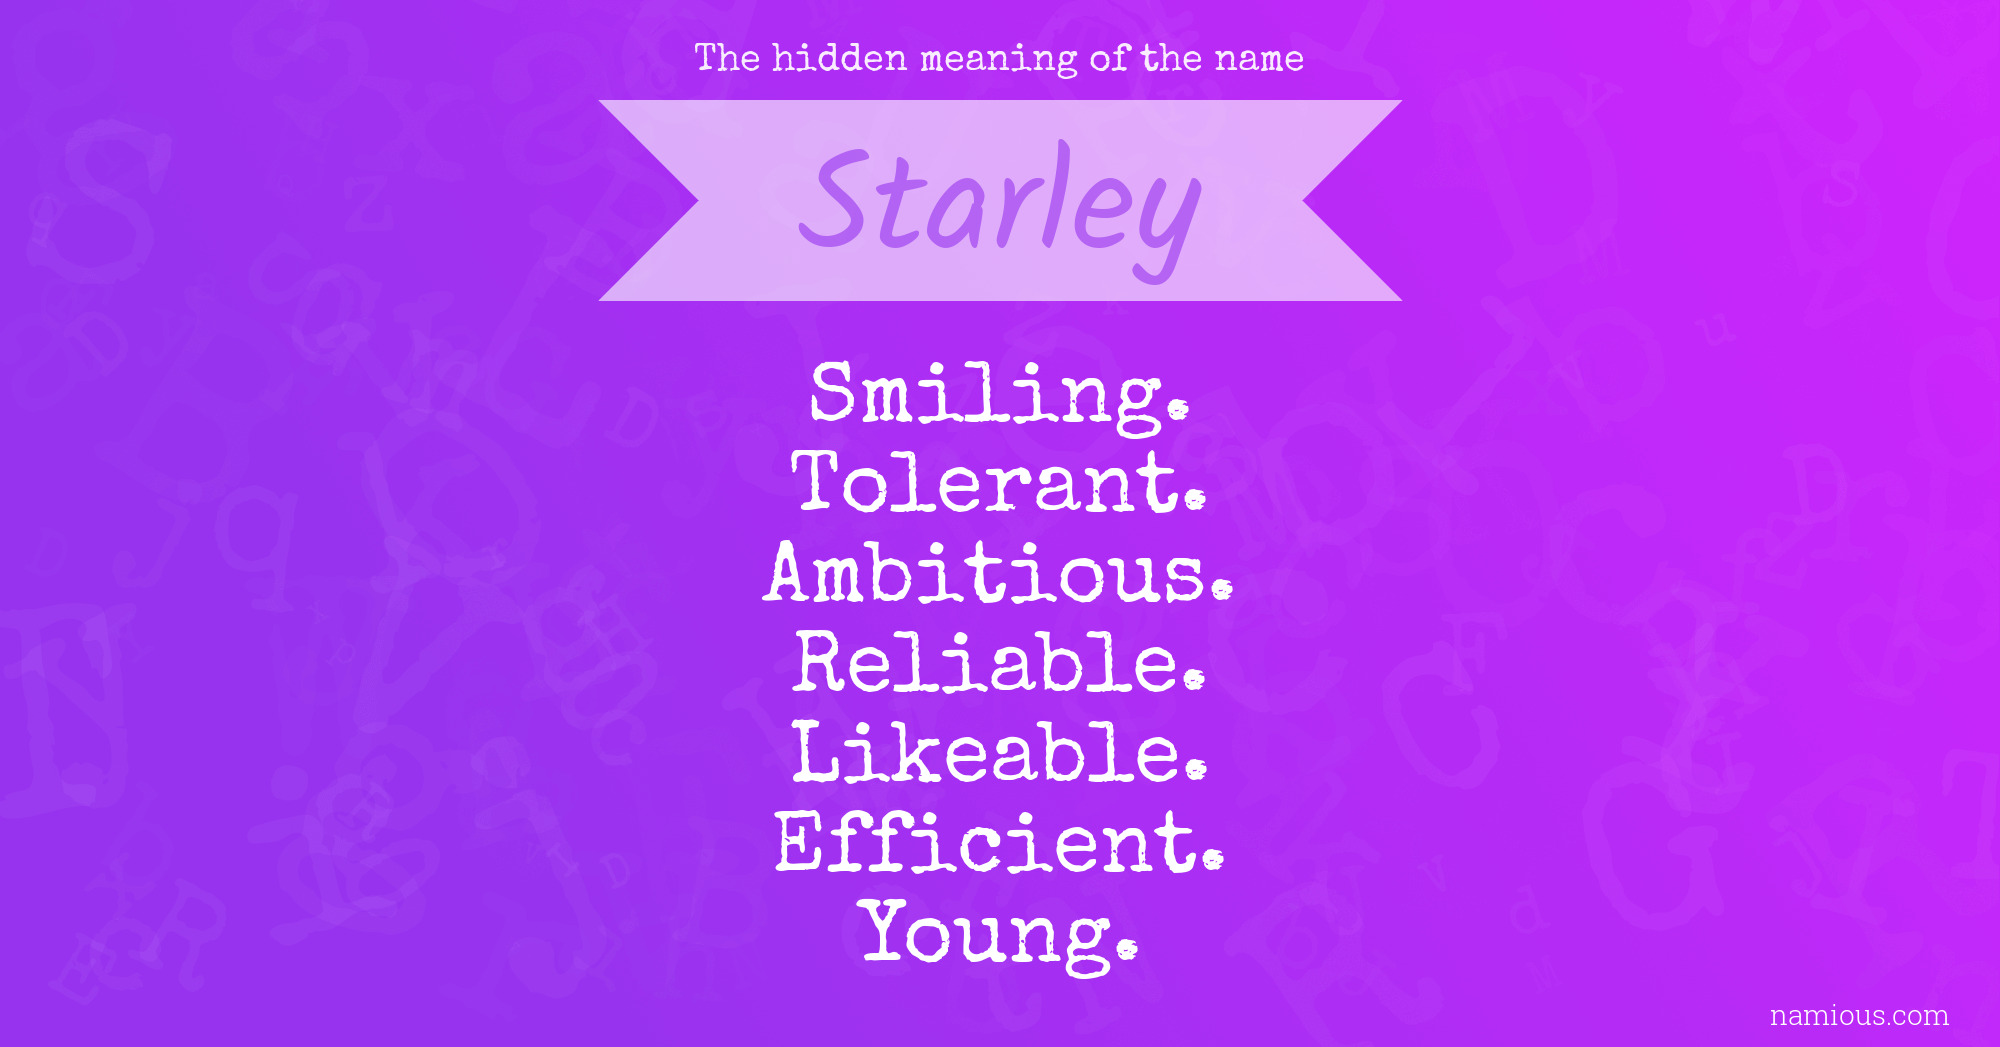 The hidden meaning of the name Starley